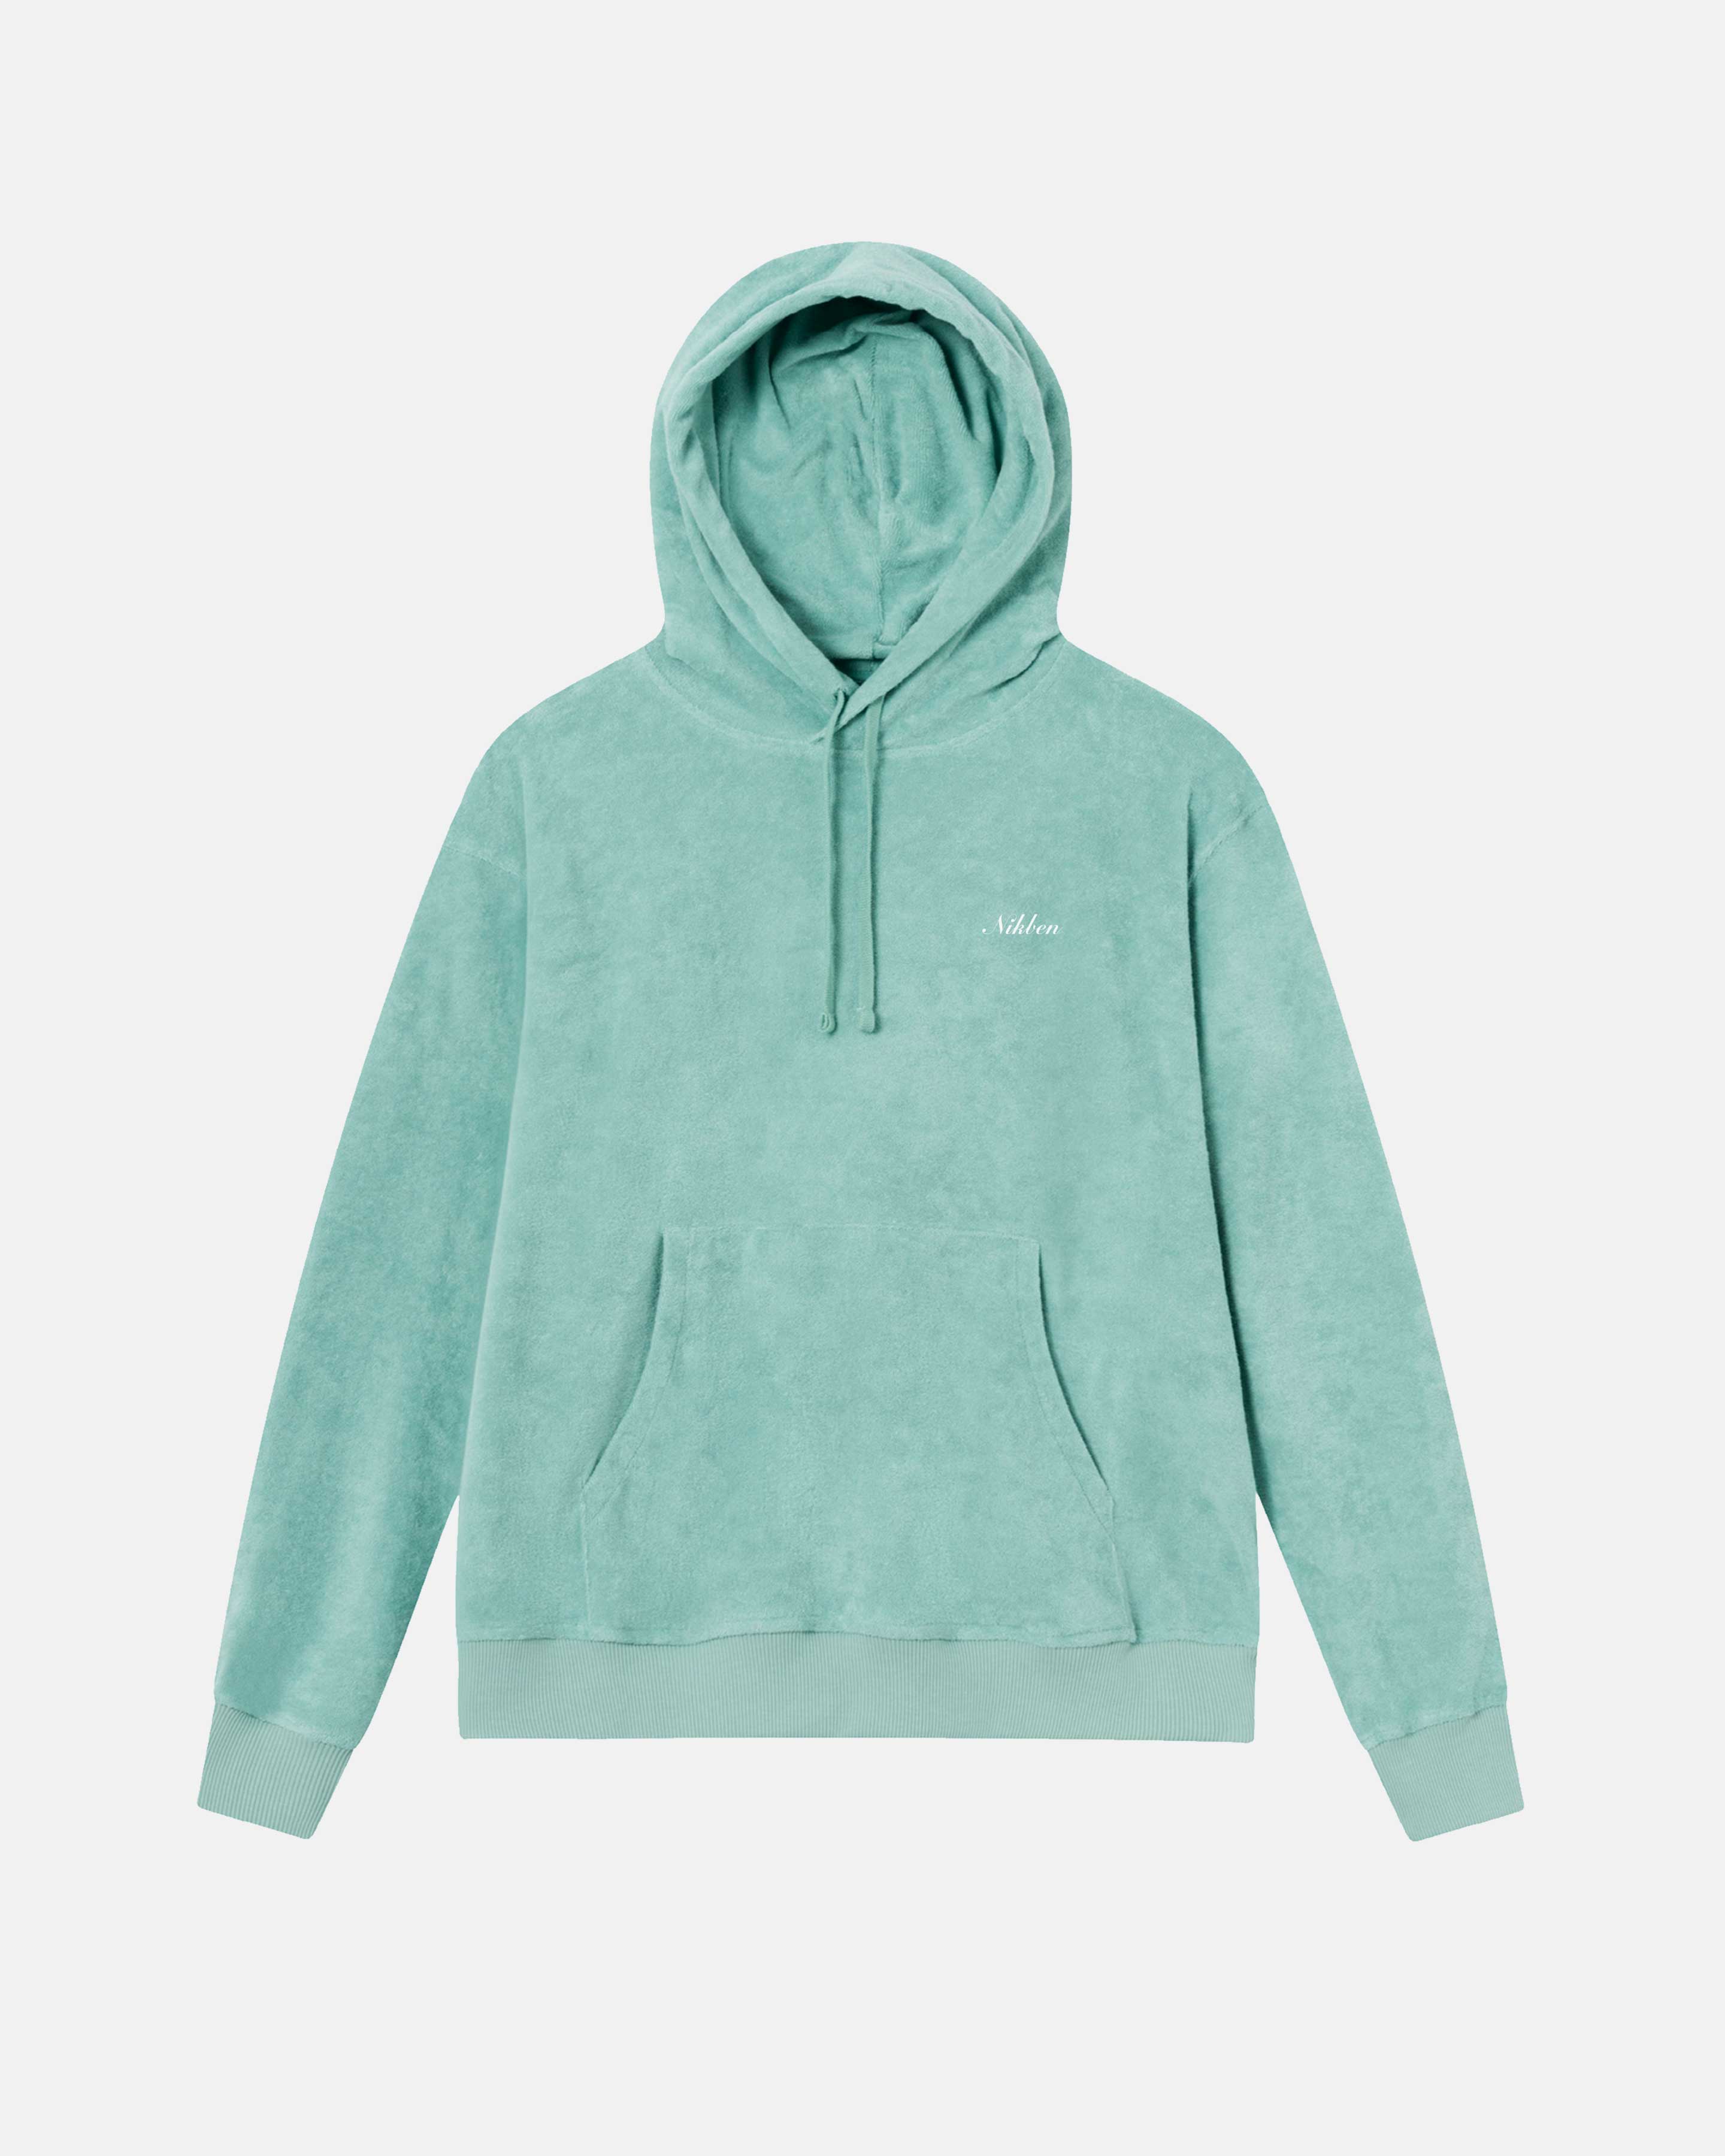 Green hoodie made from terry toweling cloth. It features drawstrings, a single front pocket, and a white embroidered 